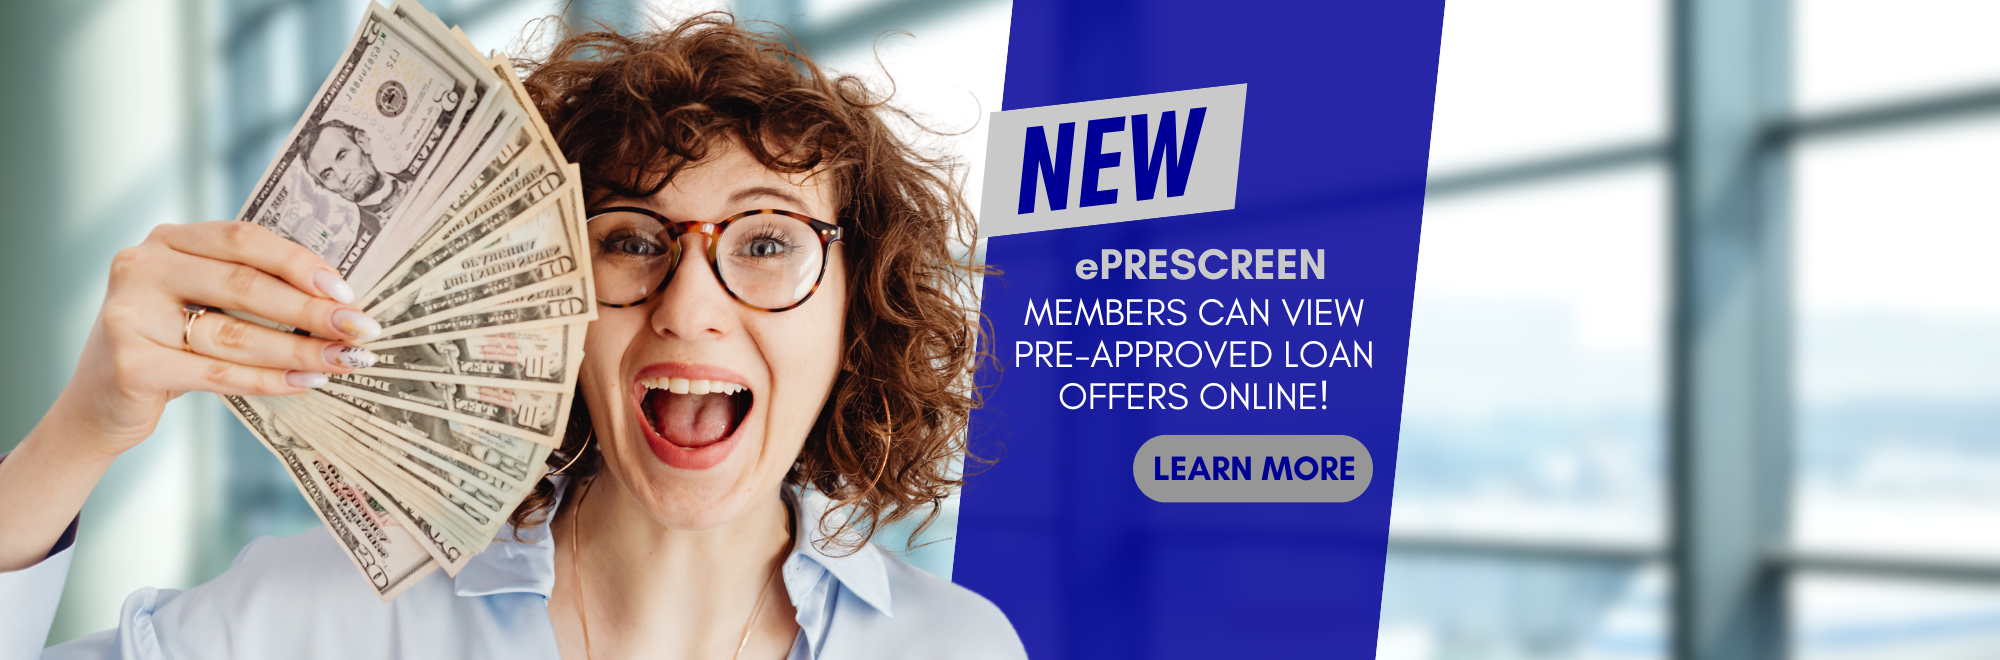 NEW ePrescreen Members can view pre-approved loan offers online! Click to learn more